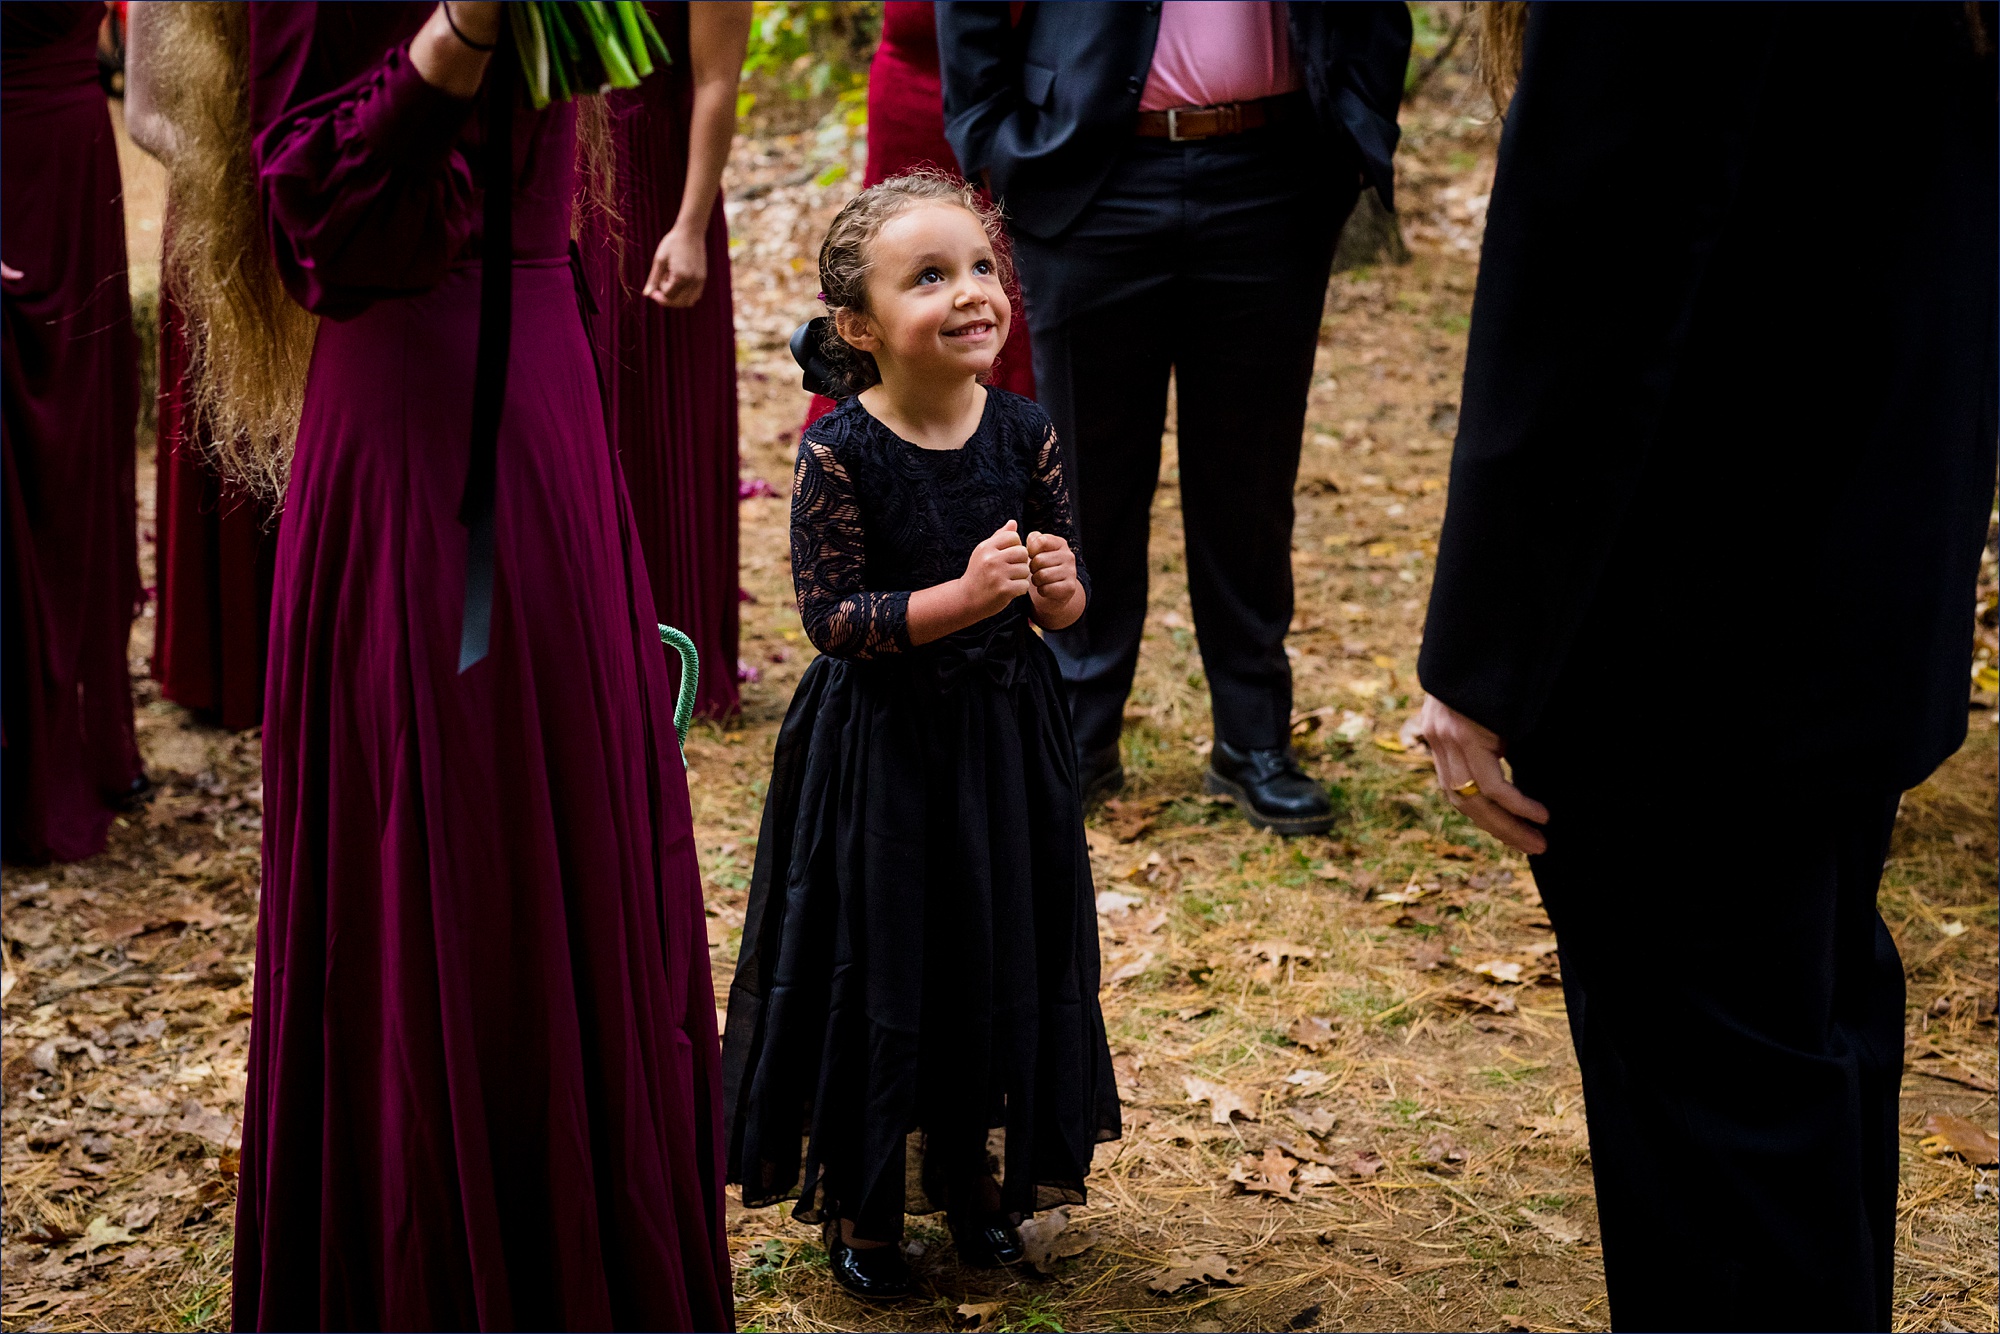 The bride's niece looks up at her new uncle on his wedding day with joy